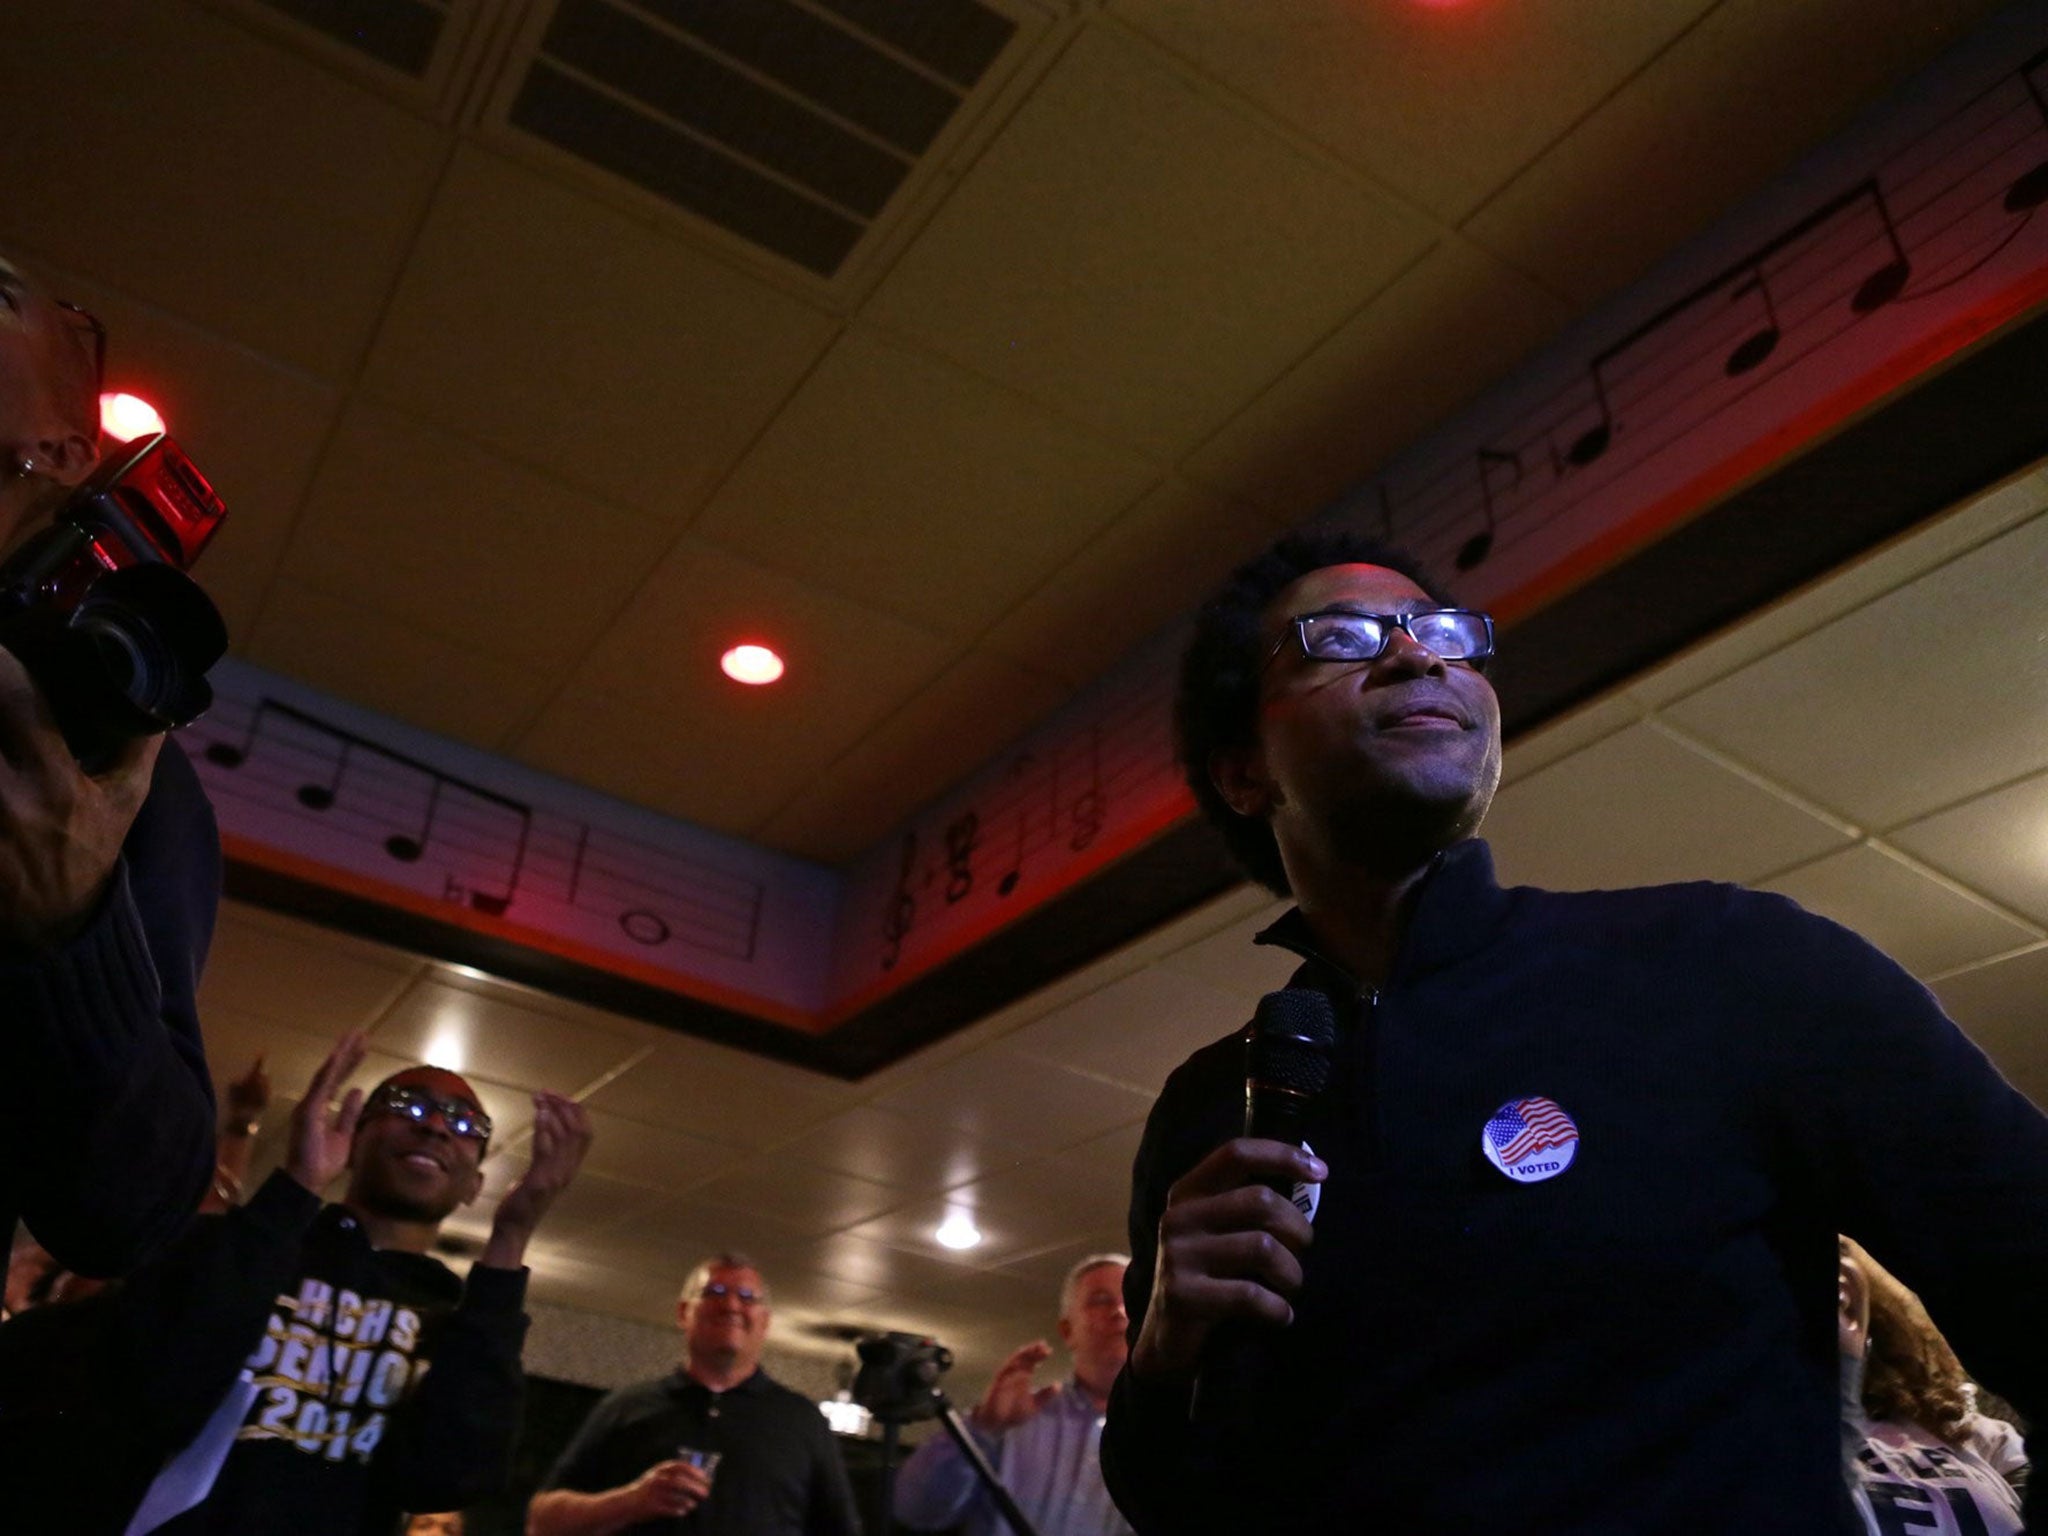 Wesley Bell, who won in Ward Three, where Michael Brown's family were from, told supporters: 'When our city needs it most, you showed up'